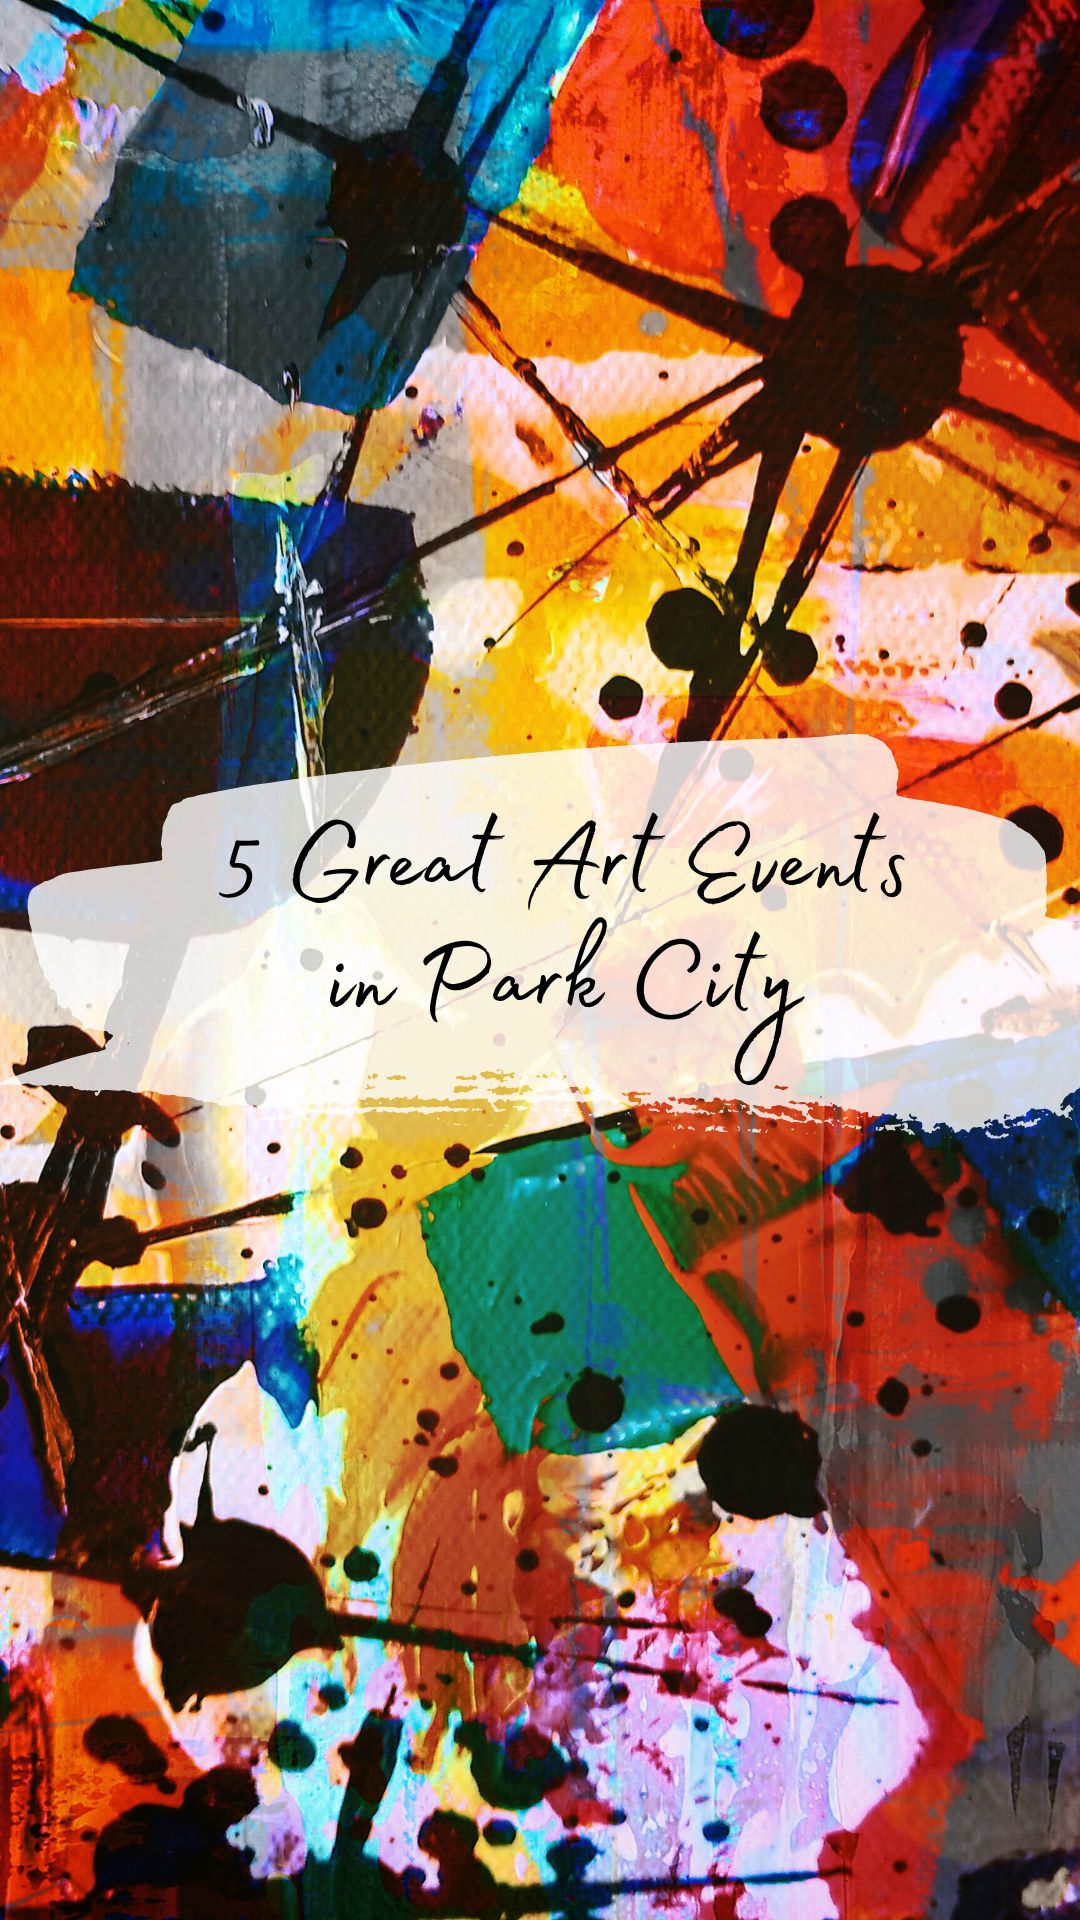 5 Great Art Events in Park City